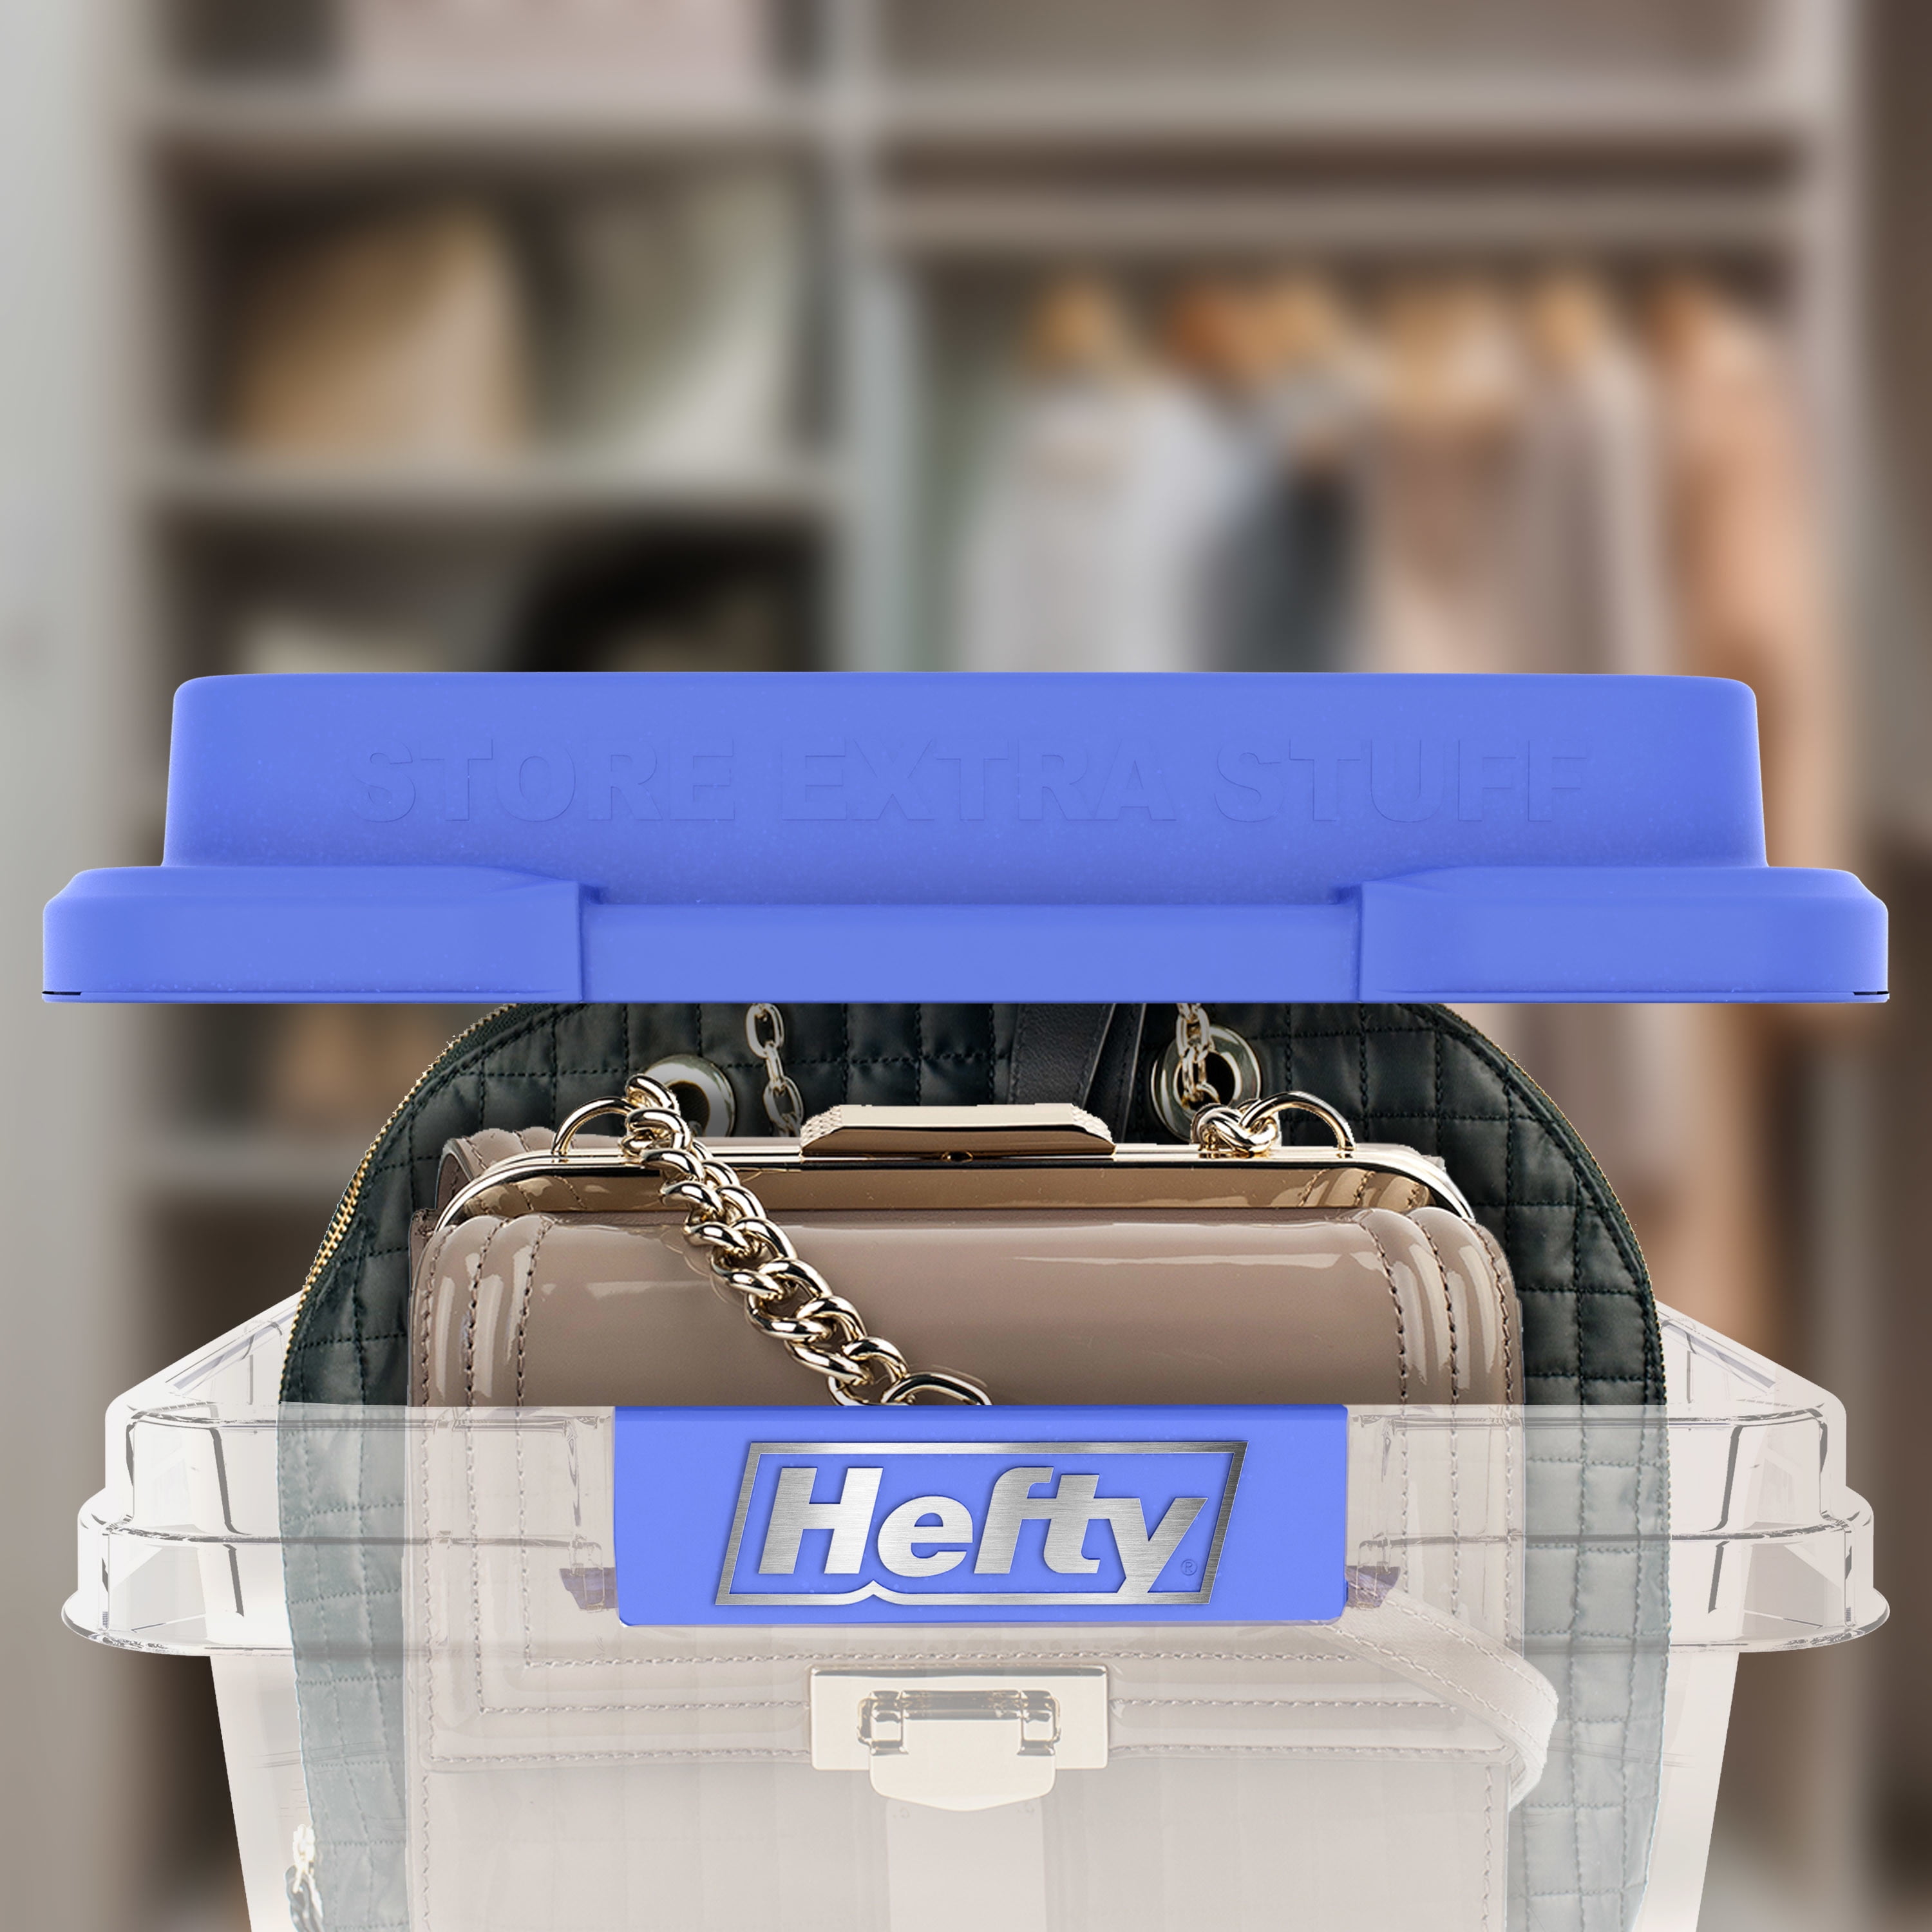  Hefty HI-RISE Clear Plastic Bin with Smoke Blue Lid (6 Pack) -  72 qt Storage Container with Lid, Ideal Space Saver for Closet Shoe Storage  Bins and Under Shelf Storage 